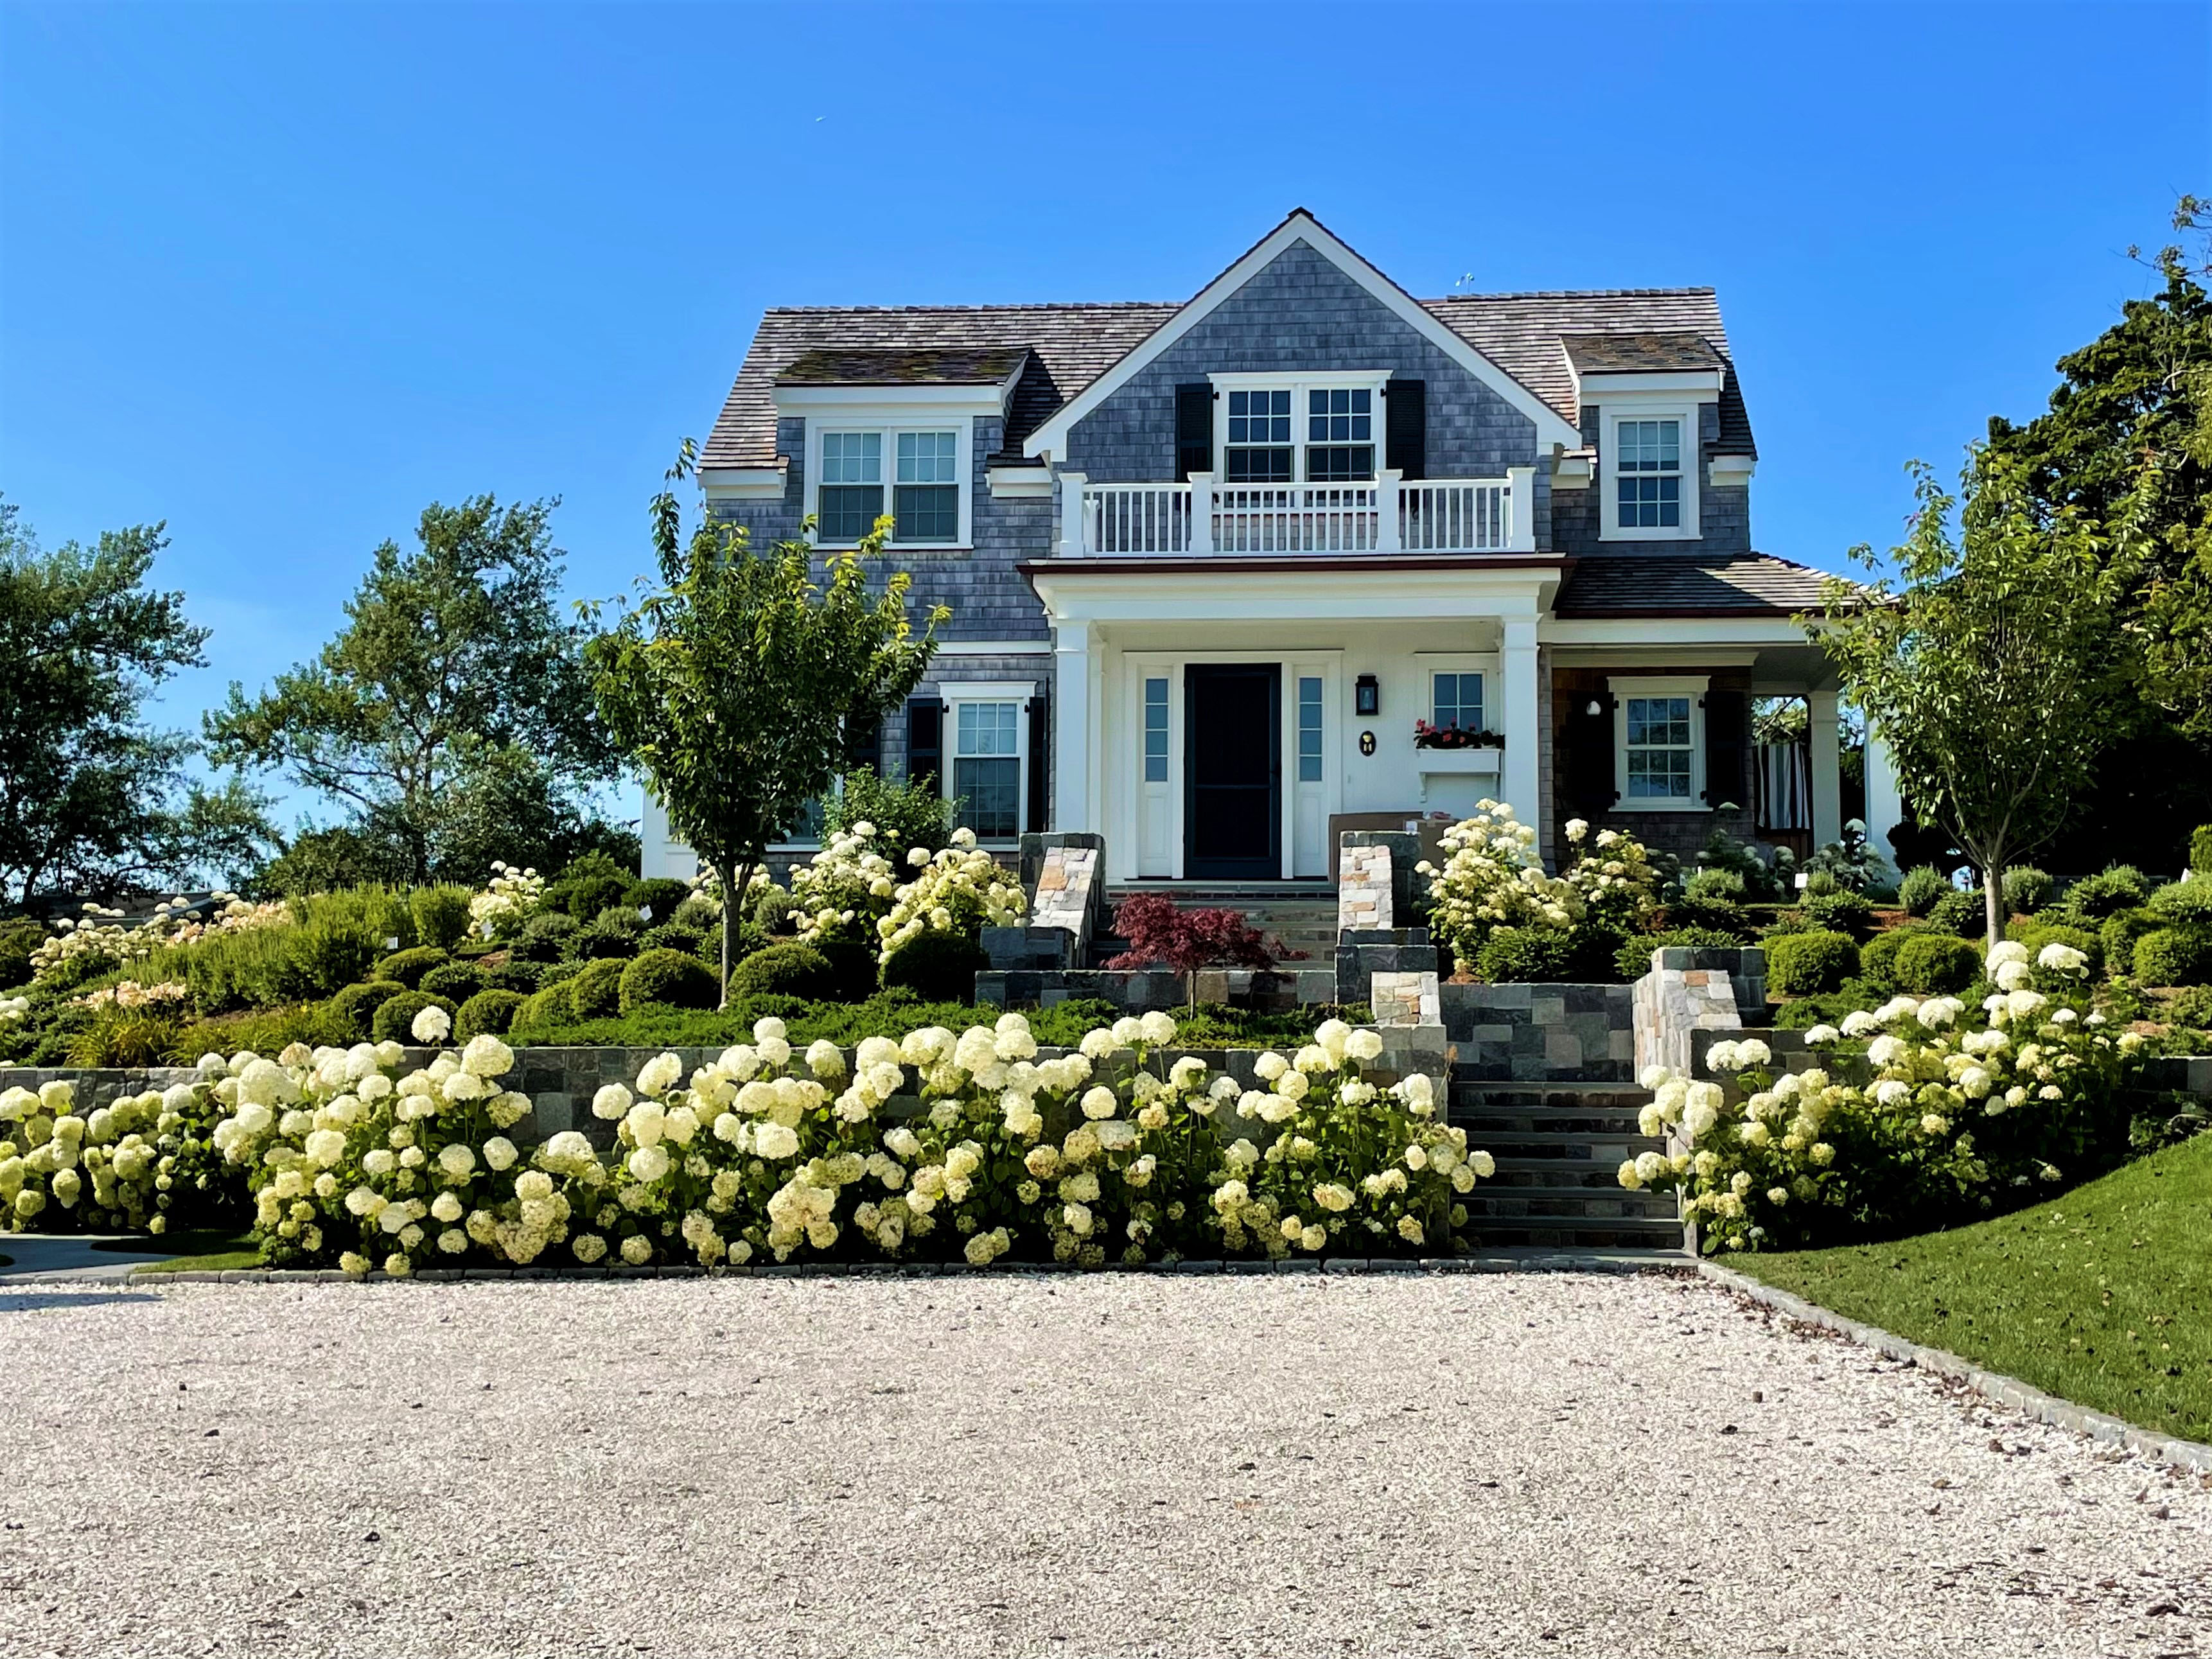 view of house with hydrangeas from driveway